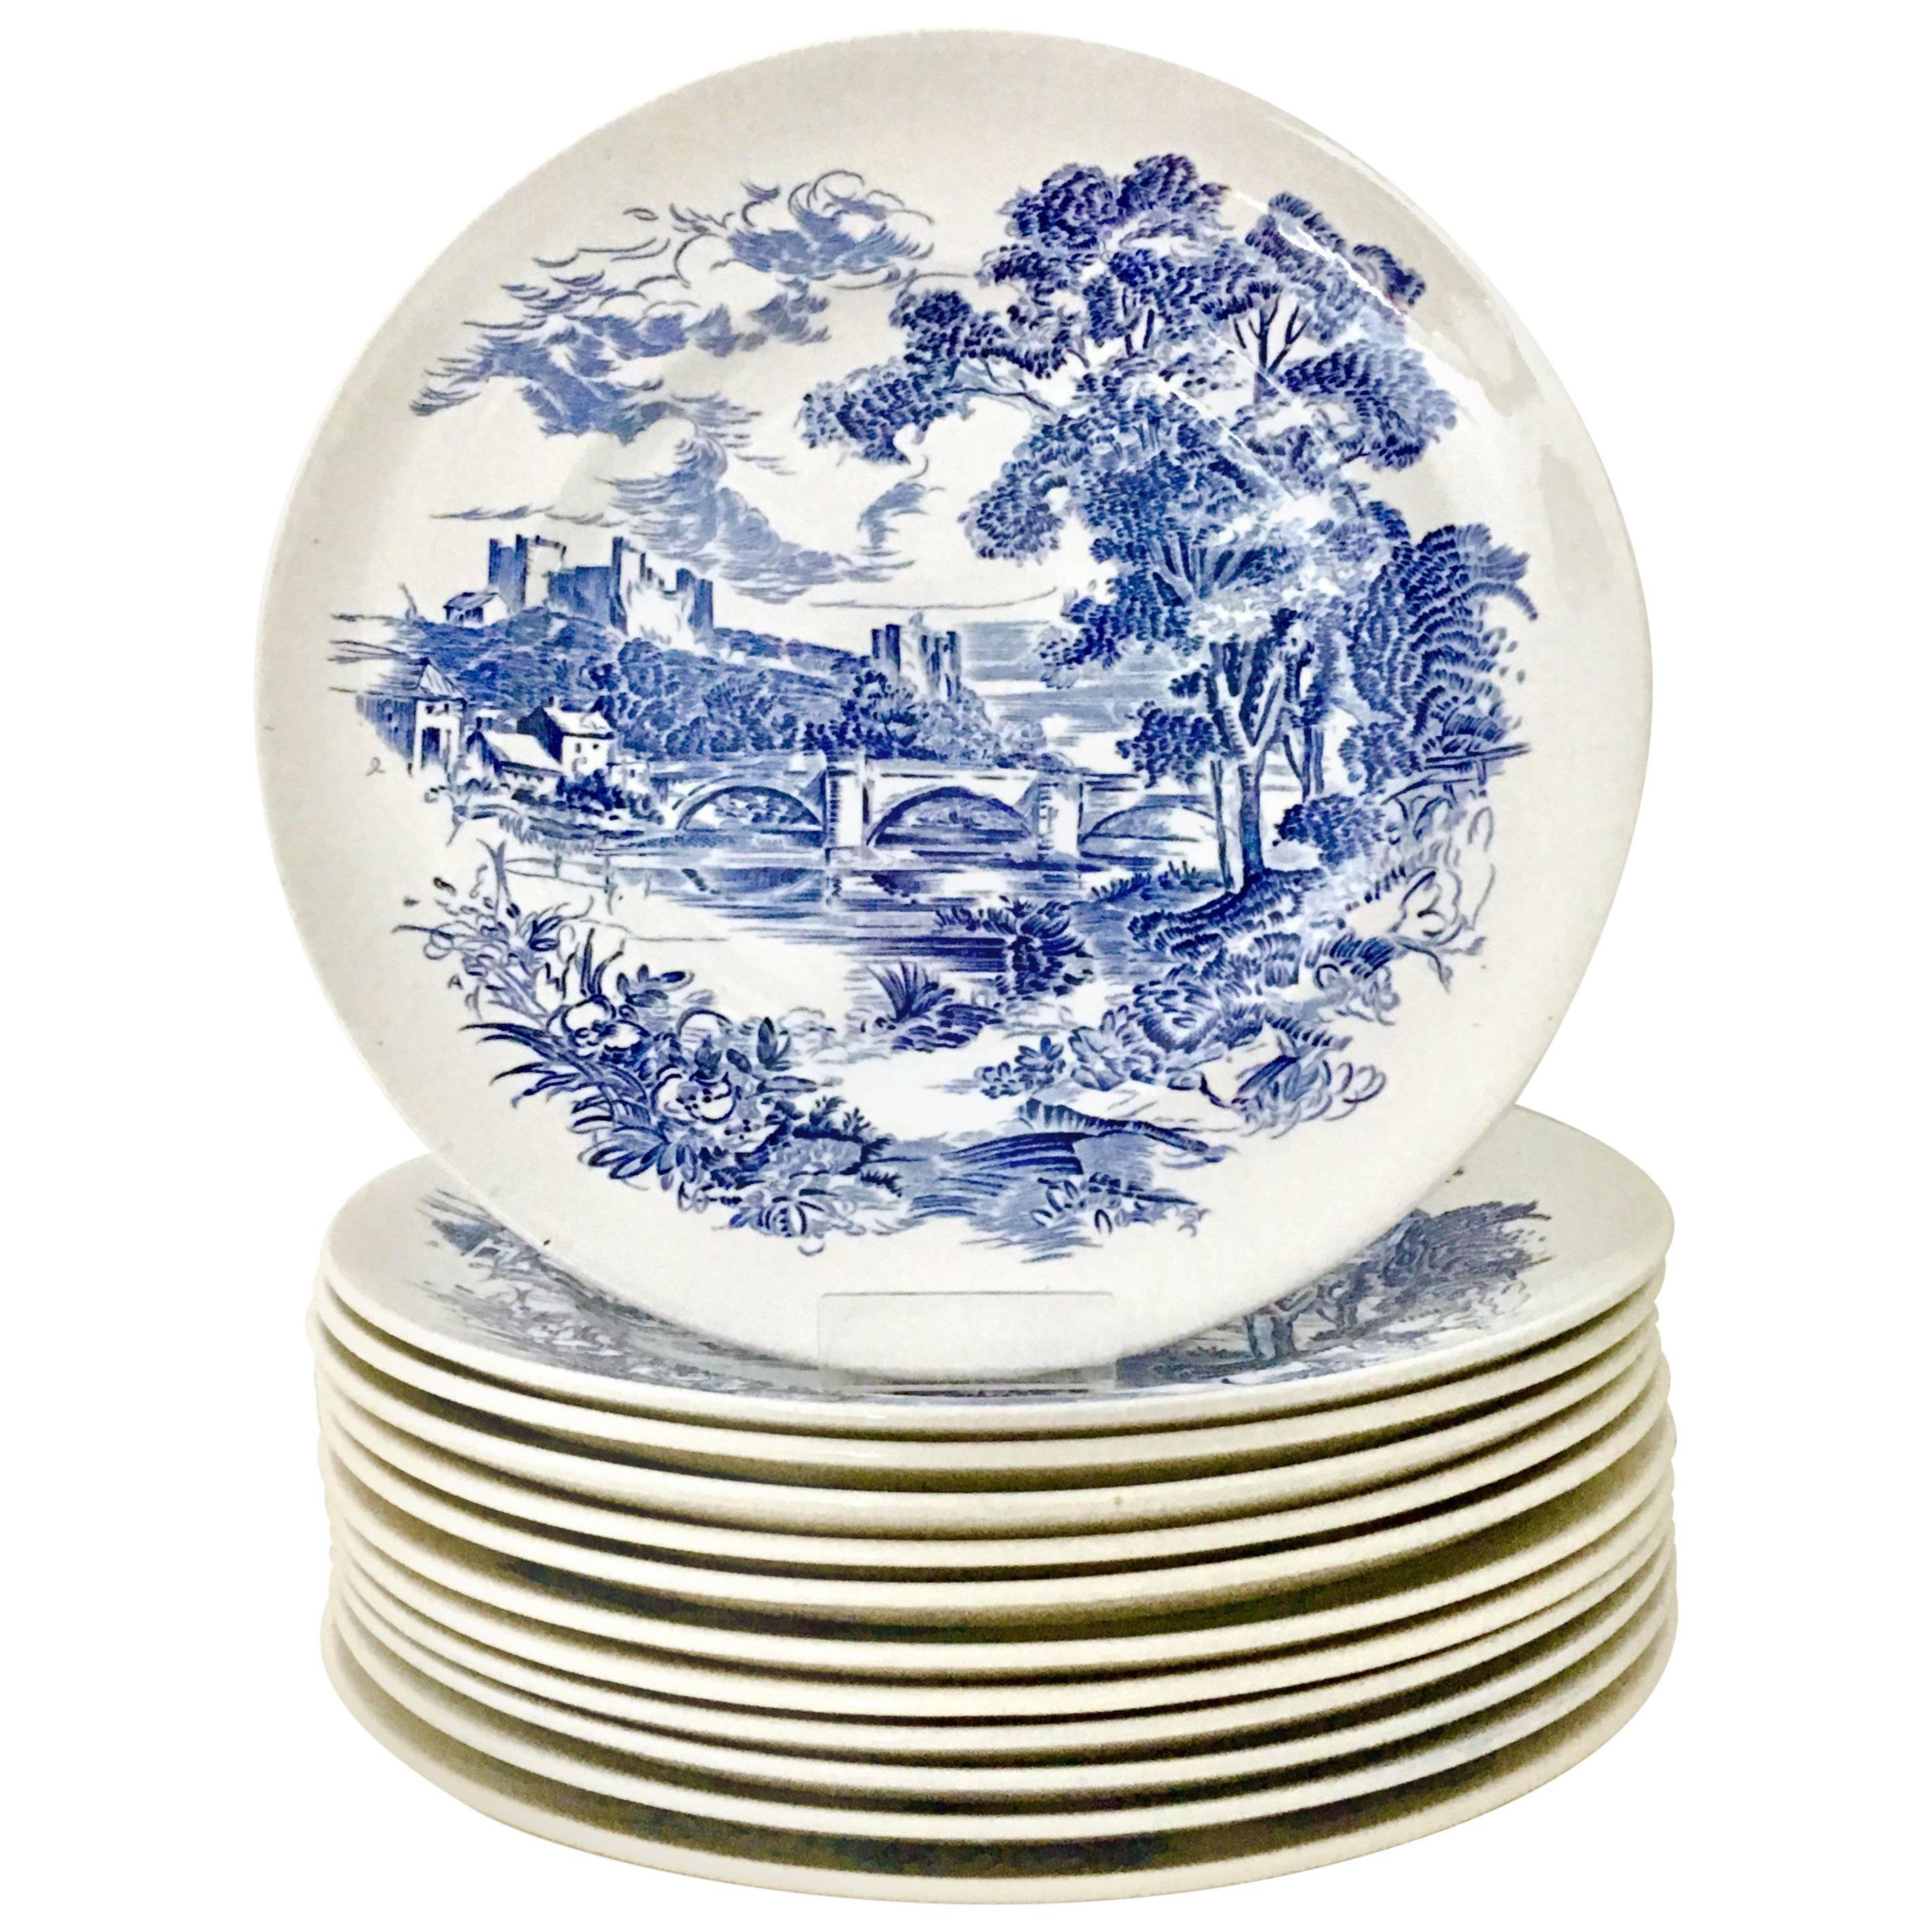 1950s Wedgwood England Set of 12 Dinner Plates "Countryside Blue"